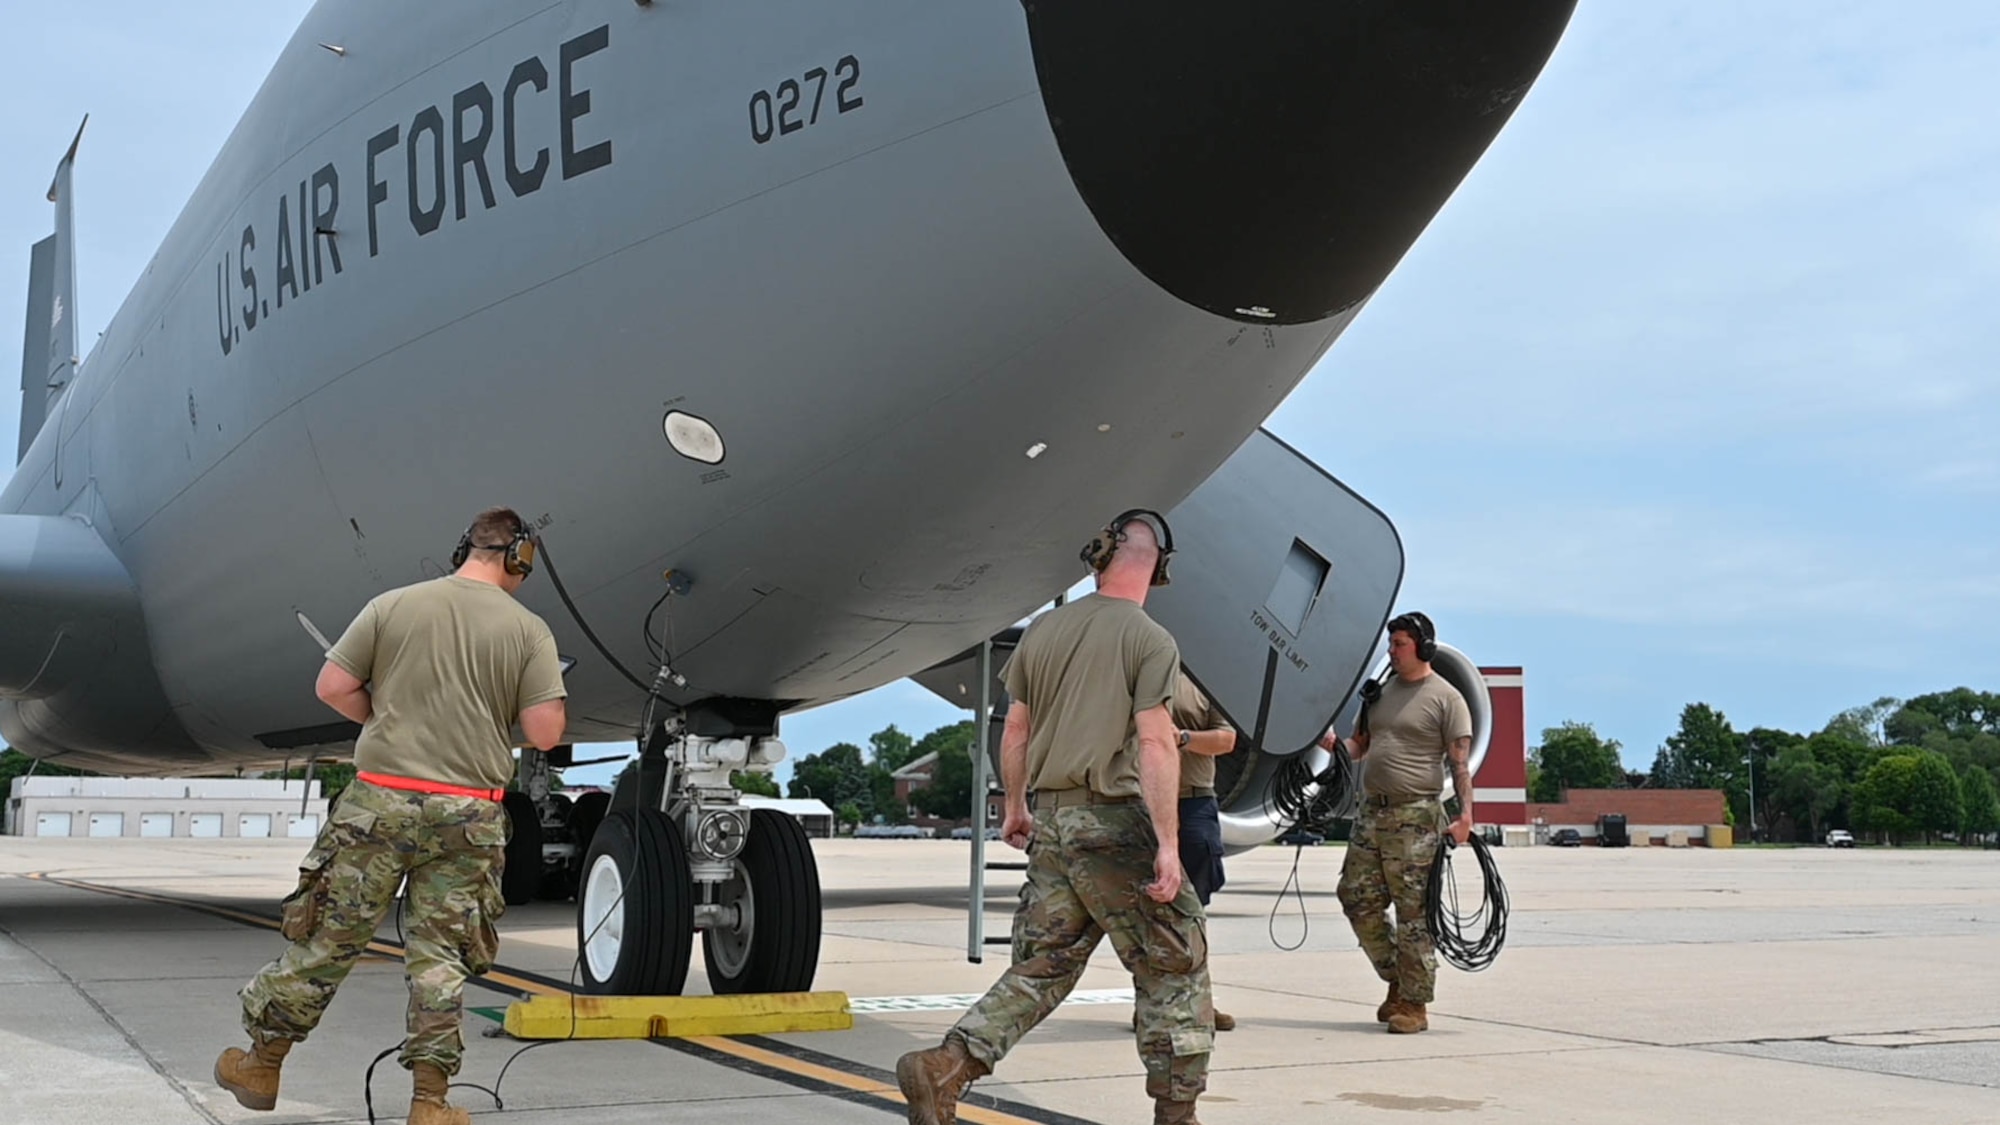 Airmen from the 127th Logistics Readiness Squadron and 434th Aircraft Maintenance Squadron pack up equipment and do final checks after a hot refueling of a KC-135R Stratotanker, July 12, 2023, at Selfridge Air National Guard Base, Michigan. Hot refueling allows an aircraft’s engines to remain running while being refueled, increasing the capabilities of aircraft to land anywhere, refuel and take-off much faster. (U.S. Air Force Photo by Amn Elise Faurote)